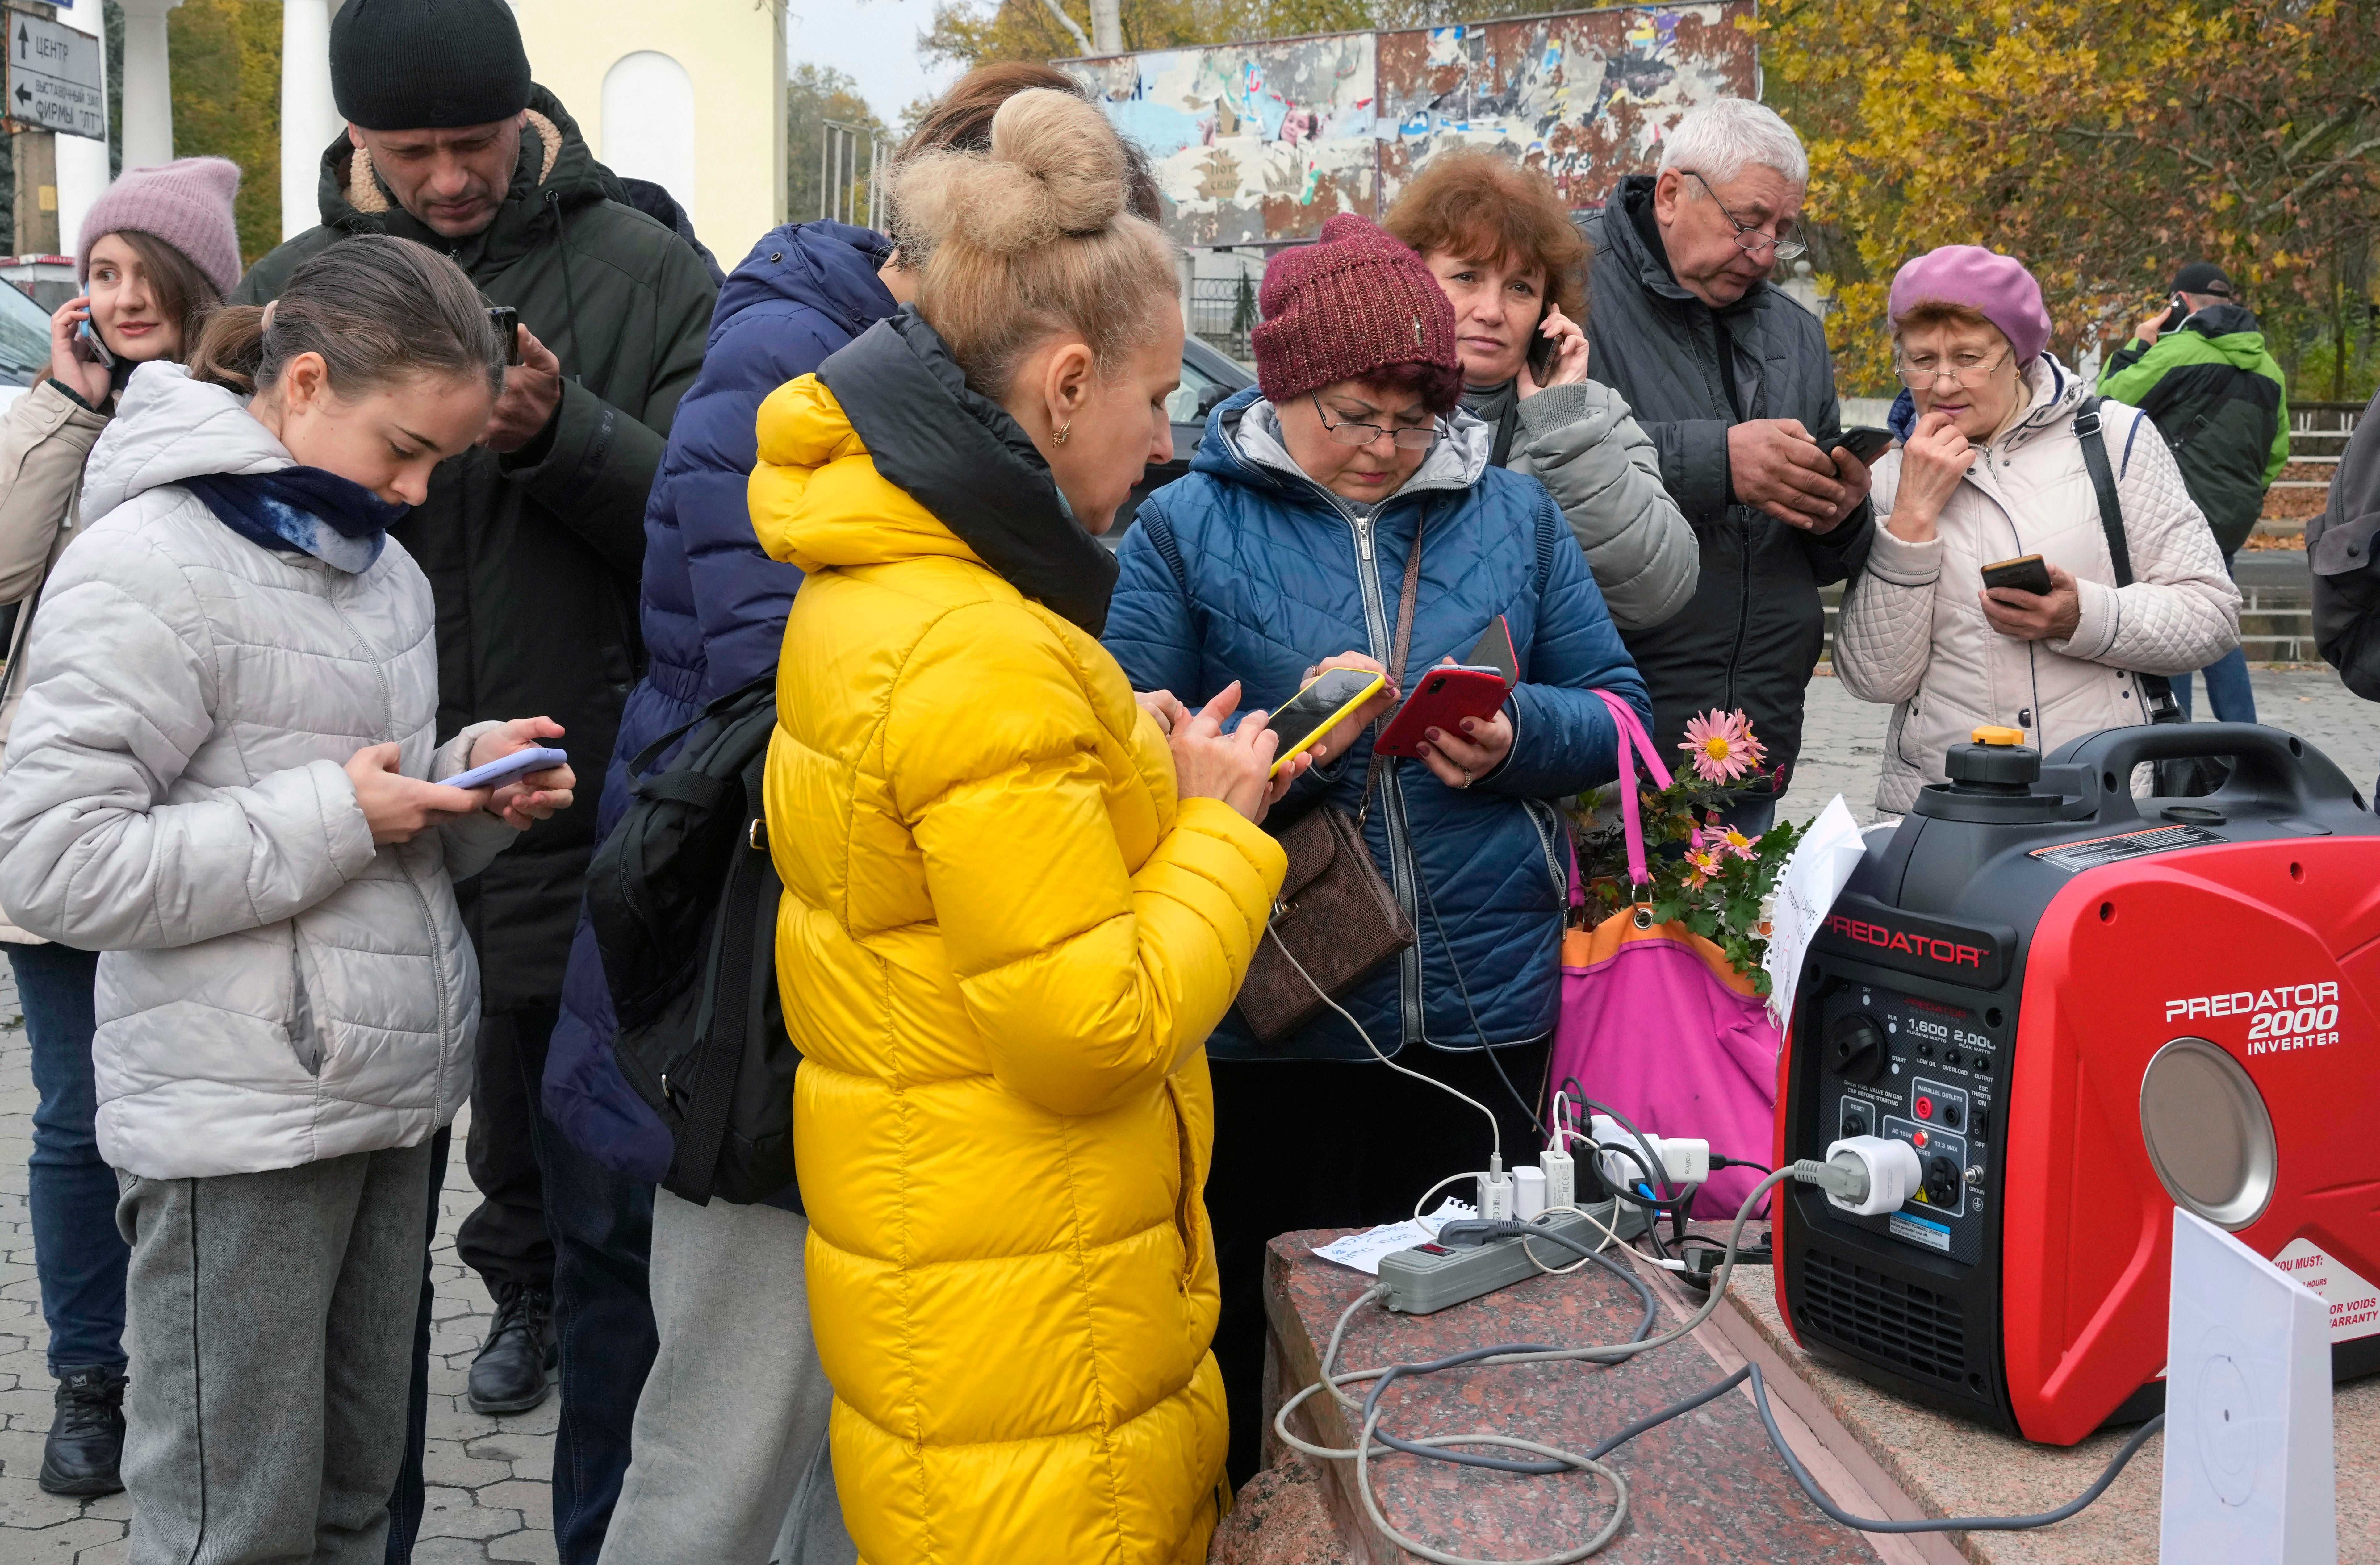 Civilians share a generator to charge their phones in Kherson, Ukraine as retreating Russians bomb power supplies